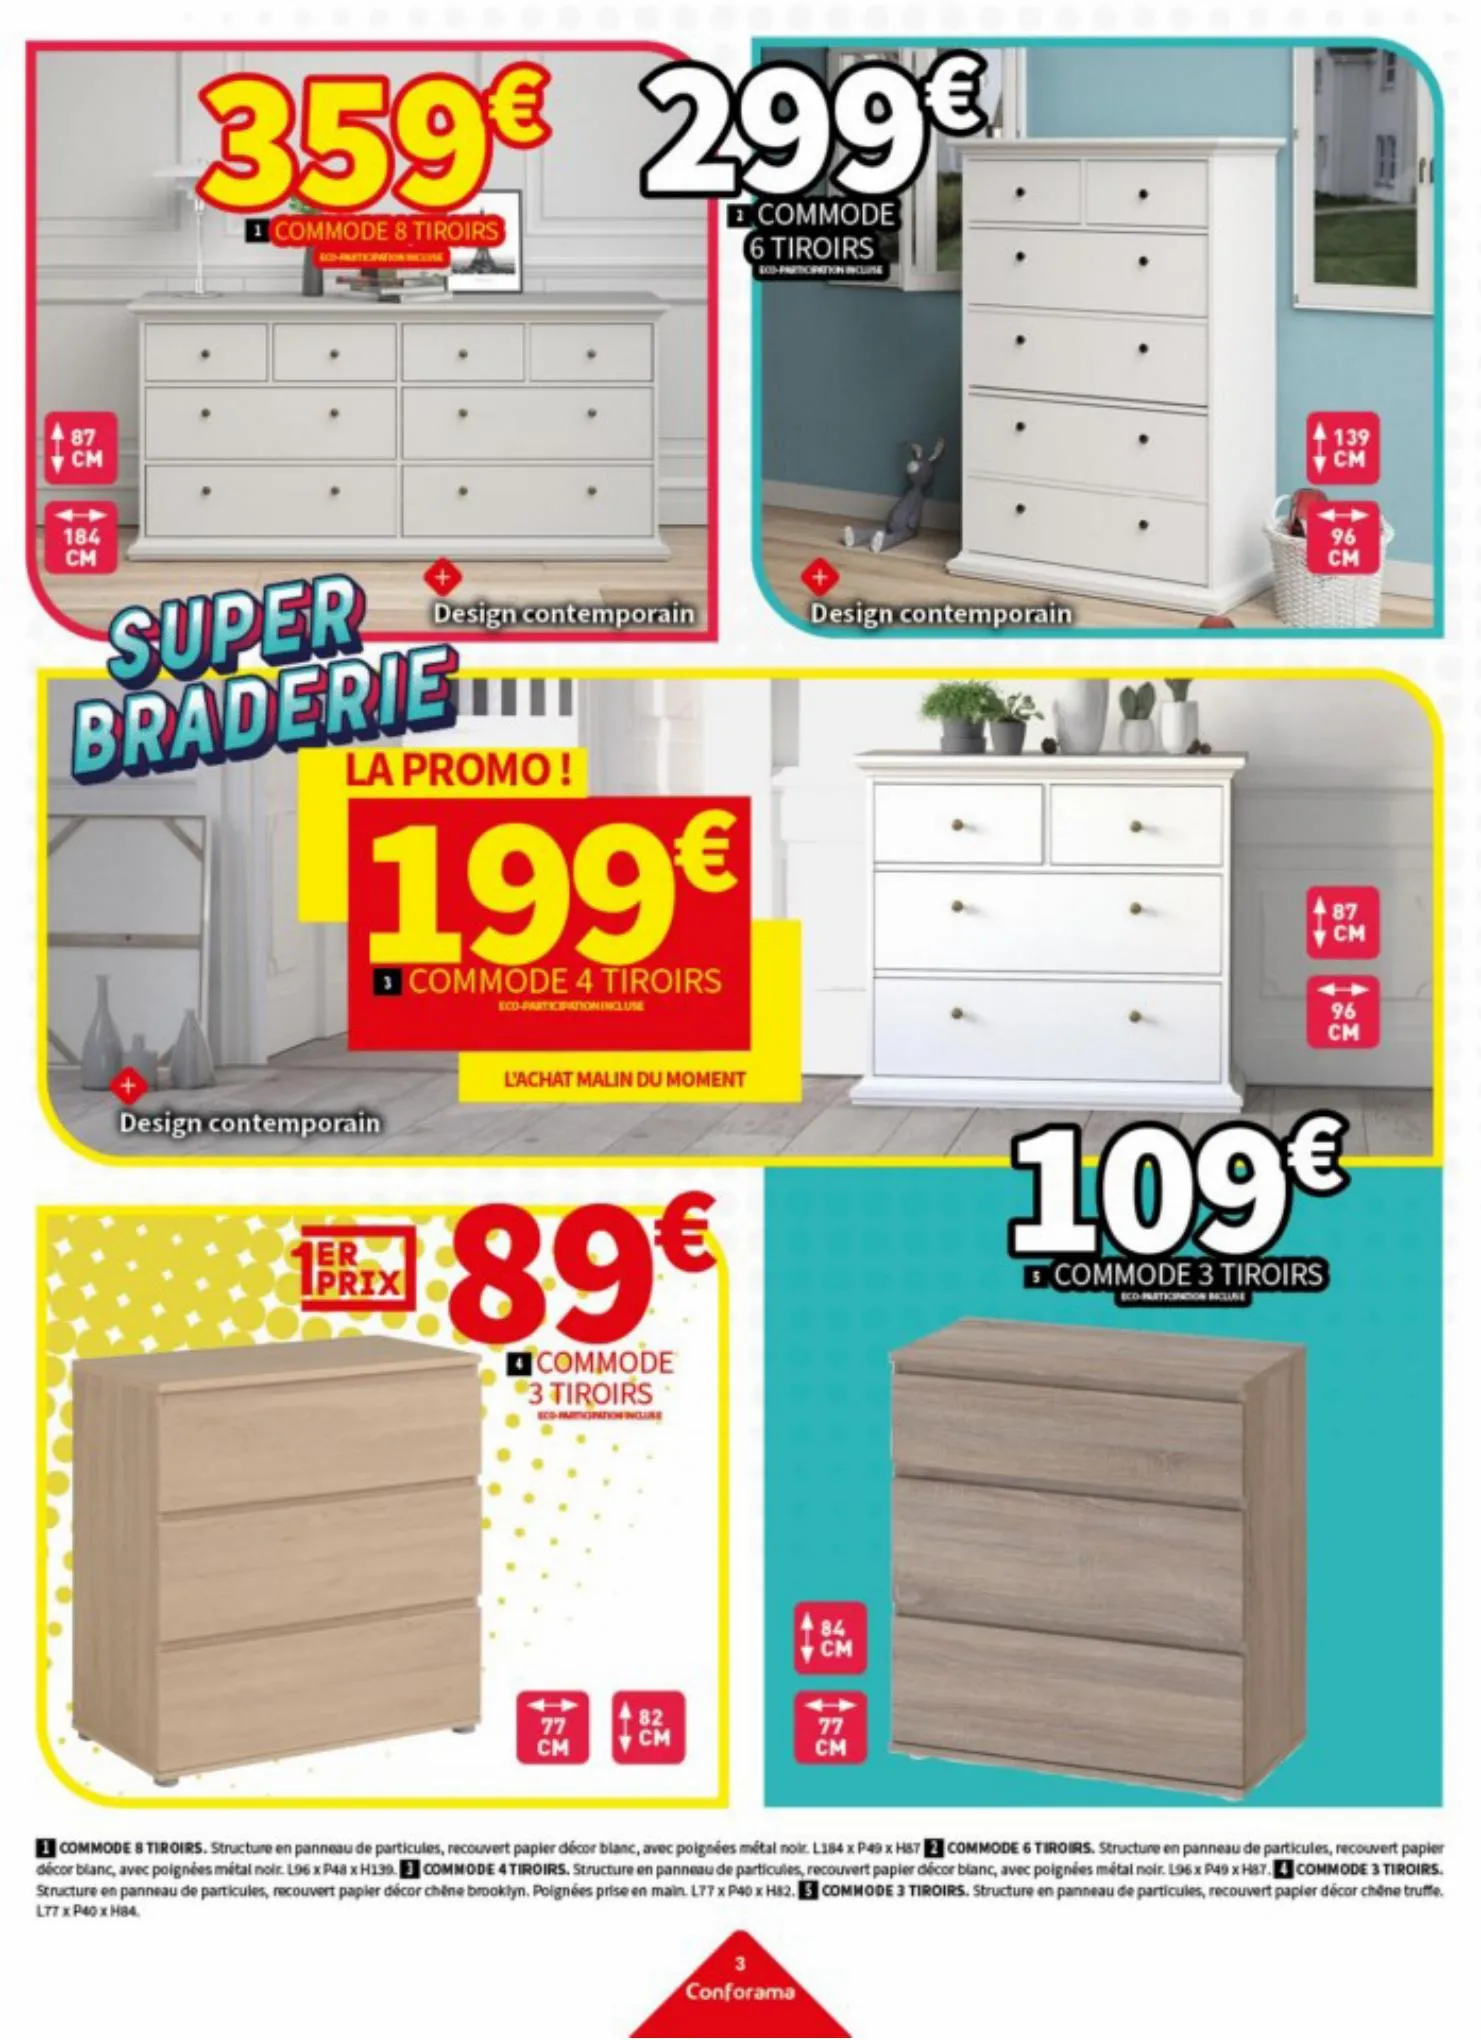 Catalogue Super braderie, page 00003